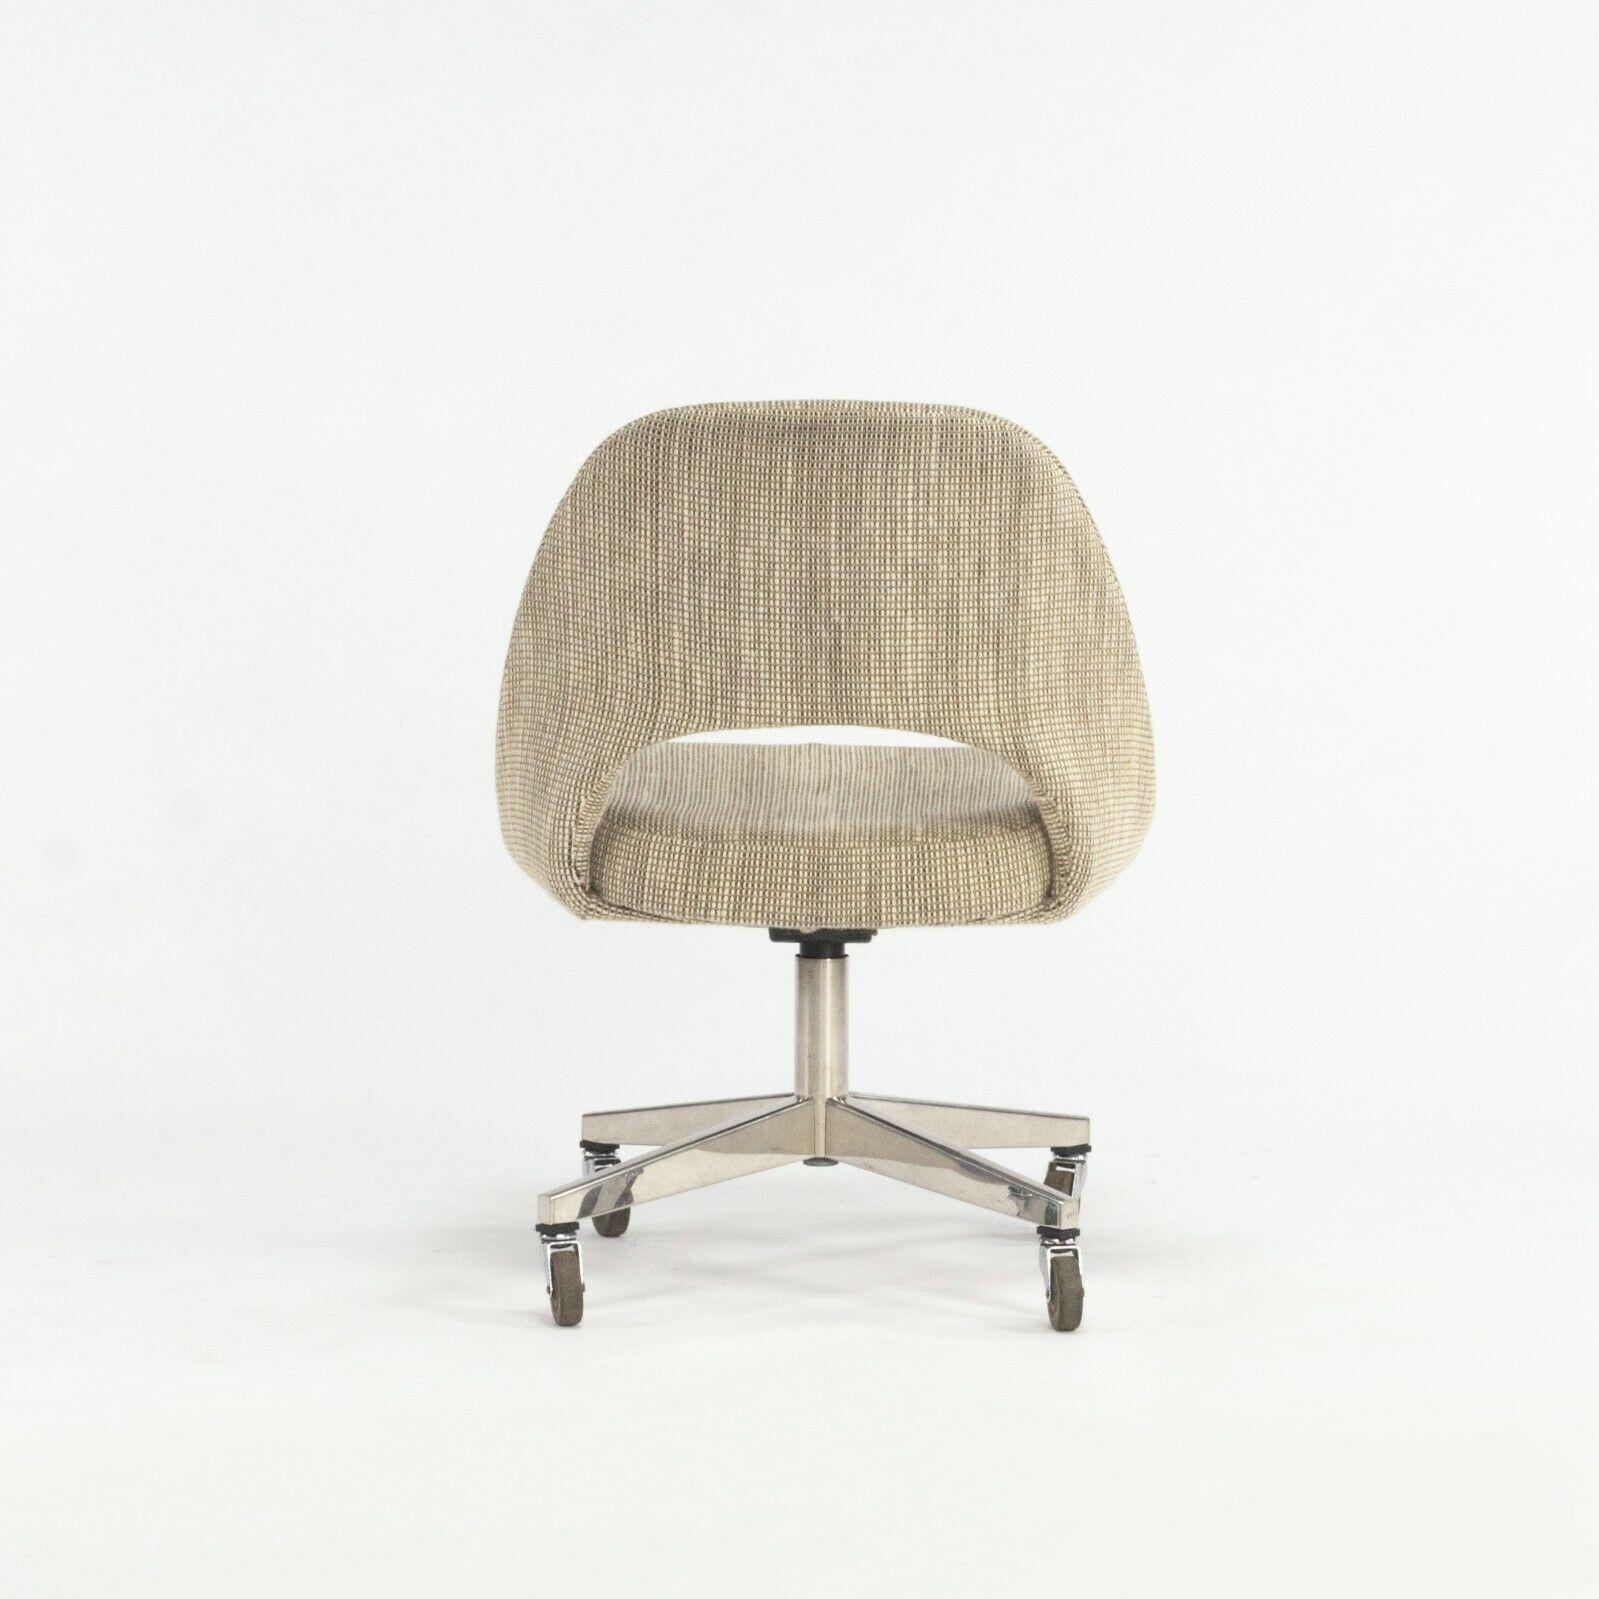 Late 20th Century 1974 Eero Saarinen for Knoll Rolling Executive Office Chairs Original Tan Fabric For Sale